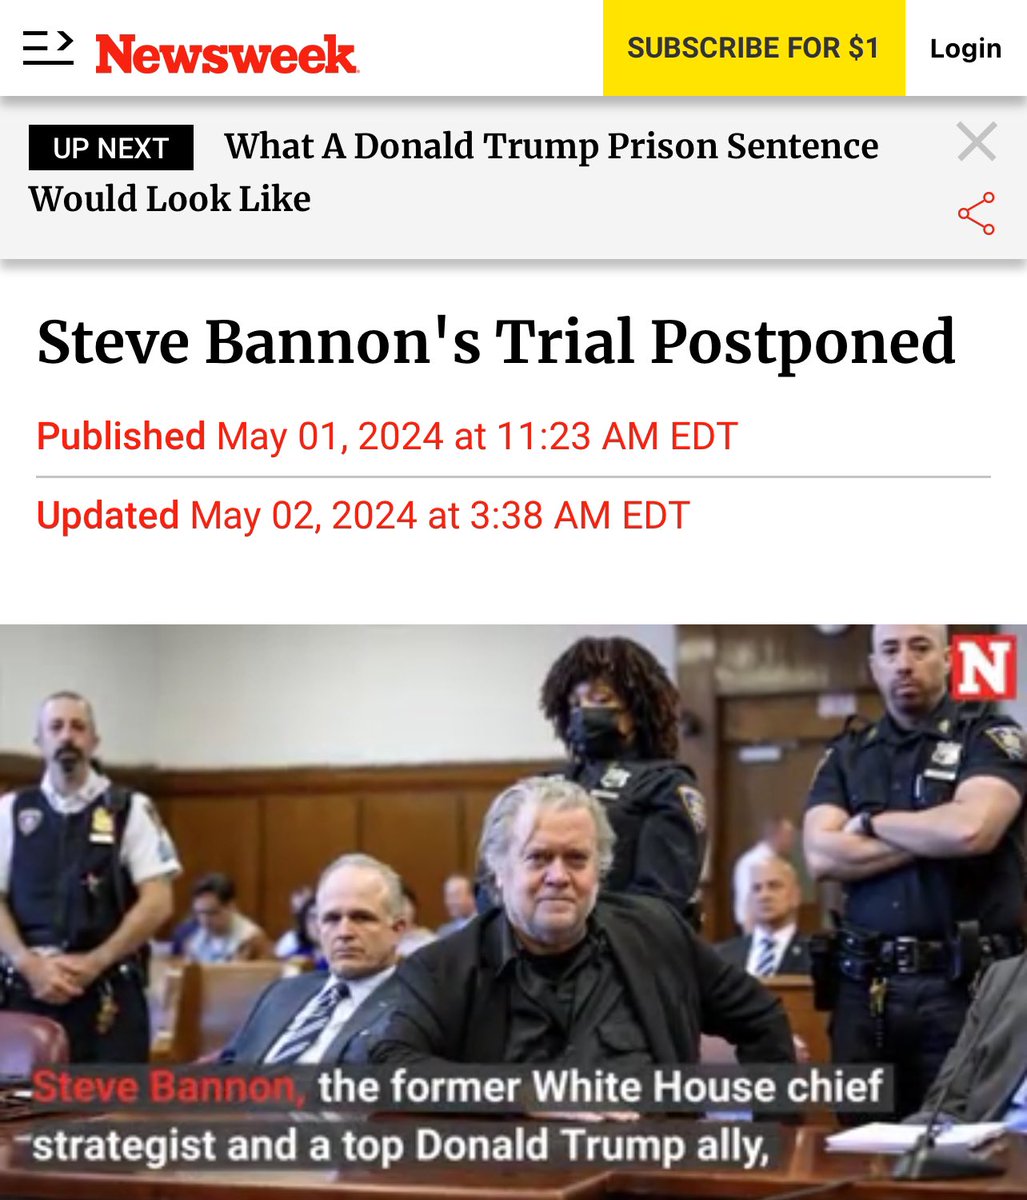 “Bannon was previously charged in an almost identical federal investigation before being pardoned by Trump hours before the then-president left office in January 2021.” “Manhattan prosecutors revived the investigation in September 2022 with state-level charges against Bannon,…